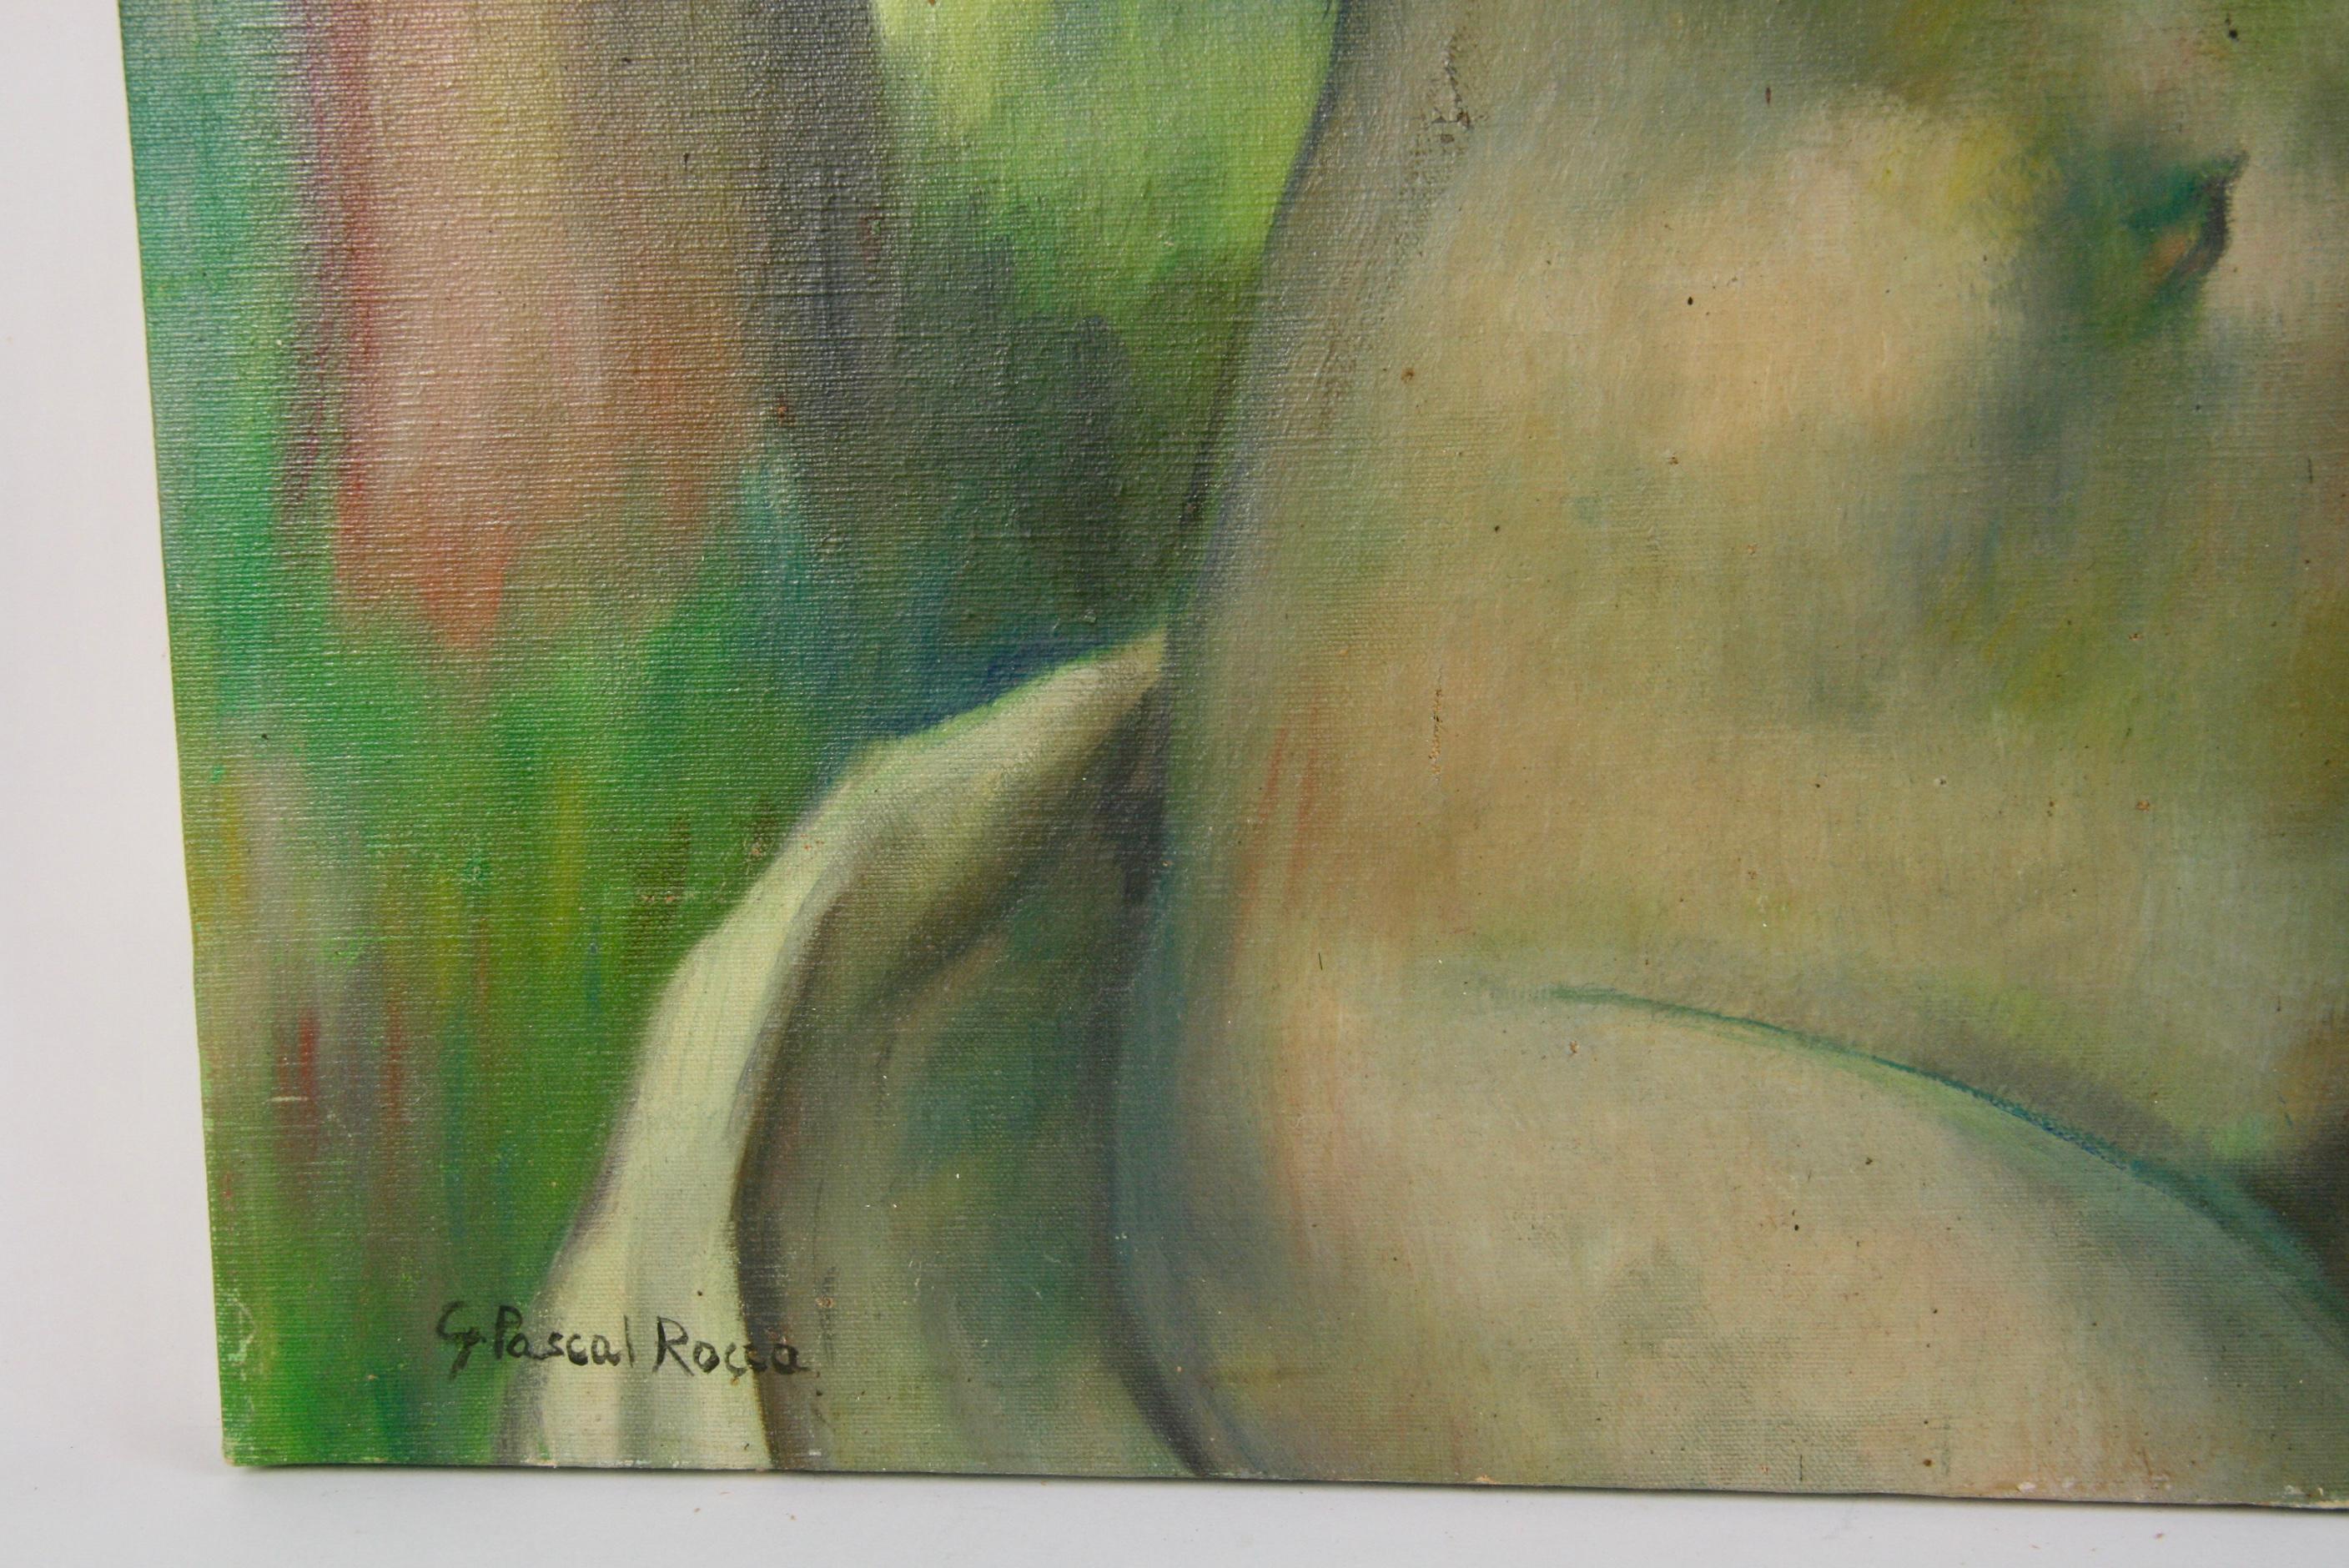  Antique French Art Deco  Posing Nude 1940 - Painting by G. Pascal Rocca